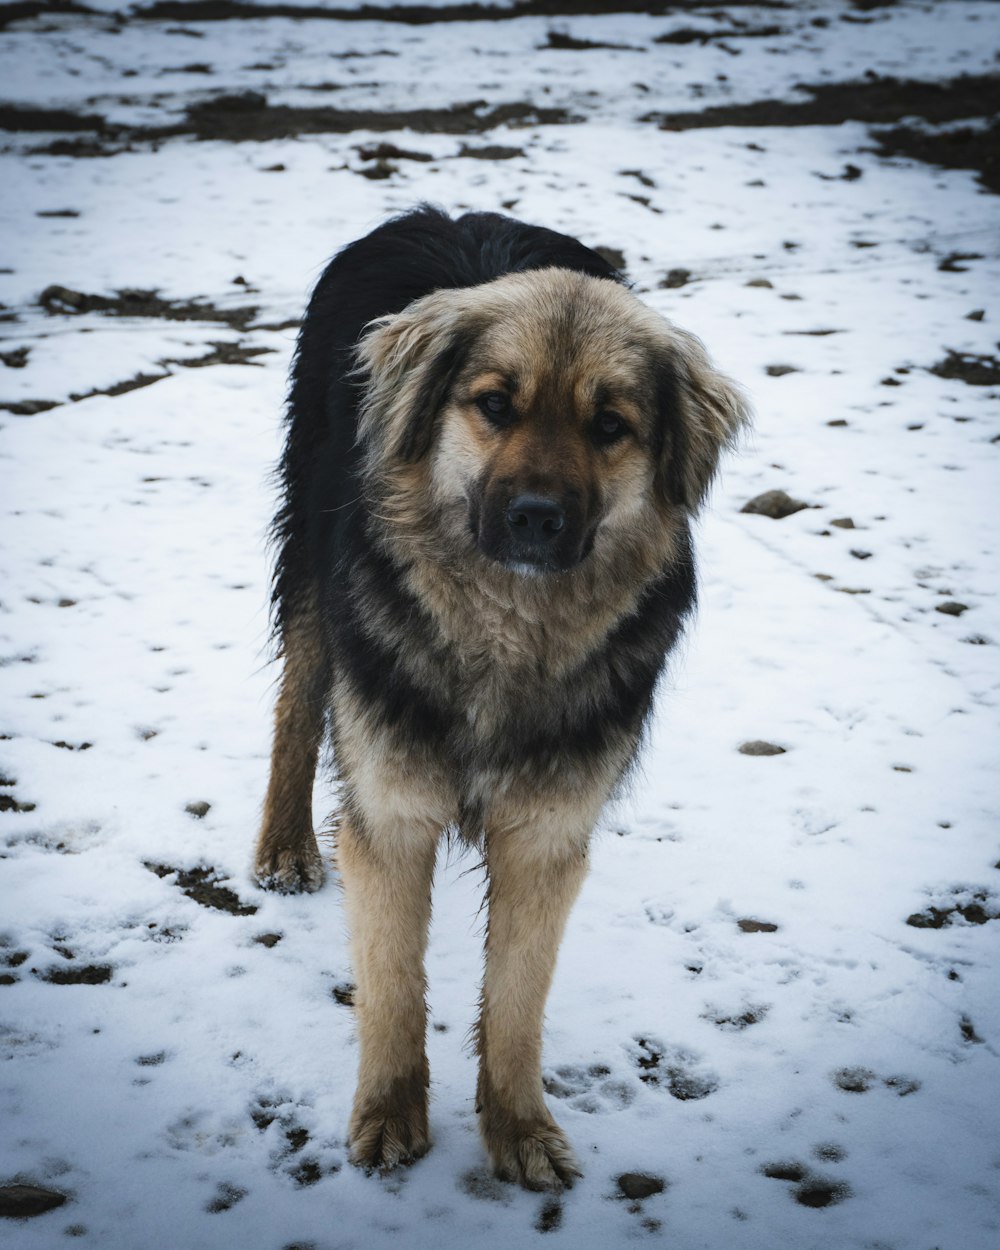 a large brown and black dog standing in the snow